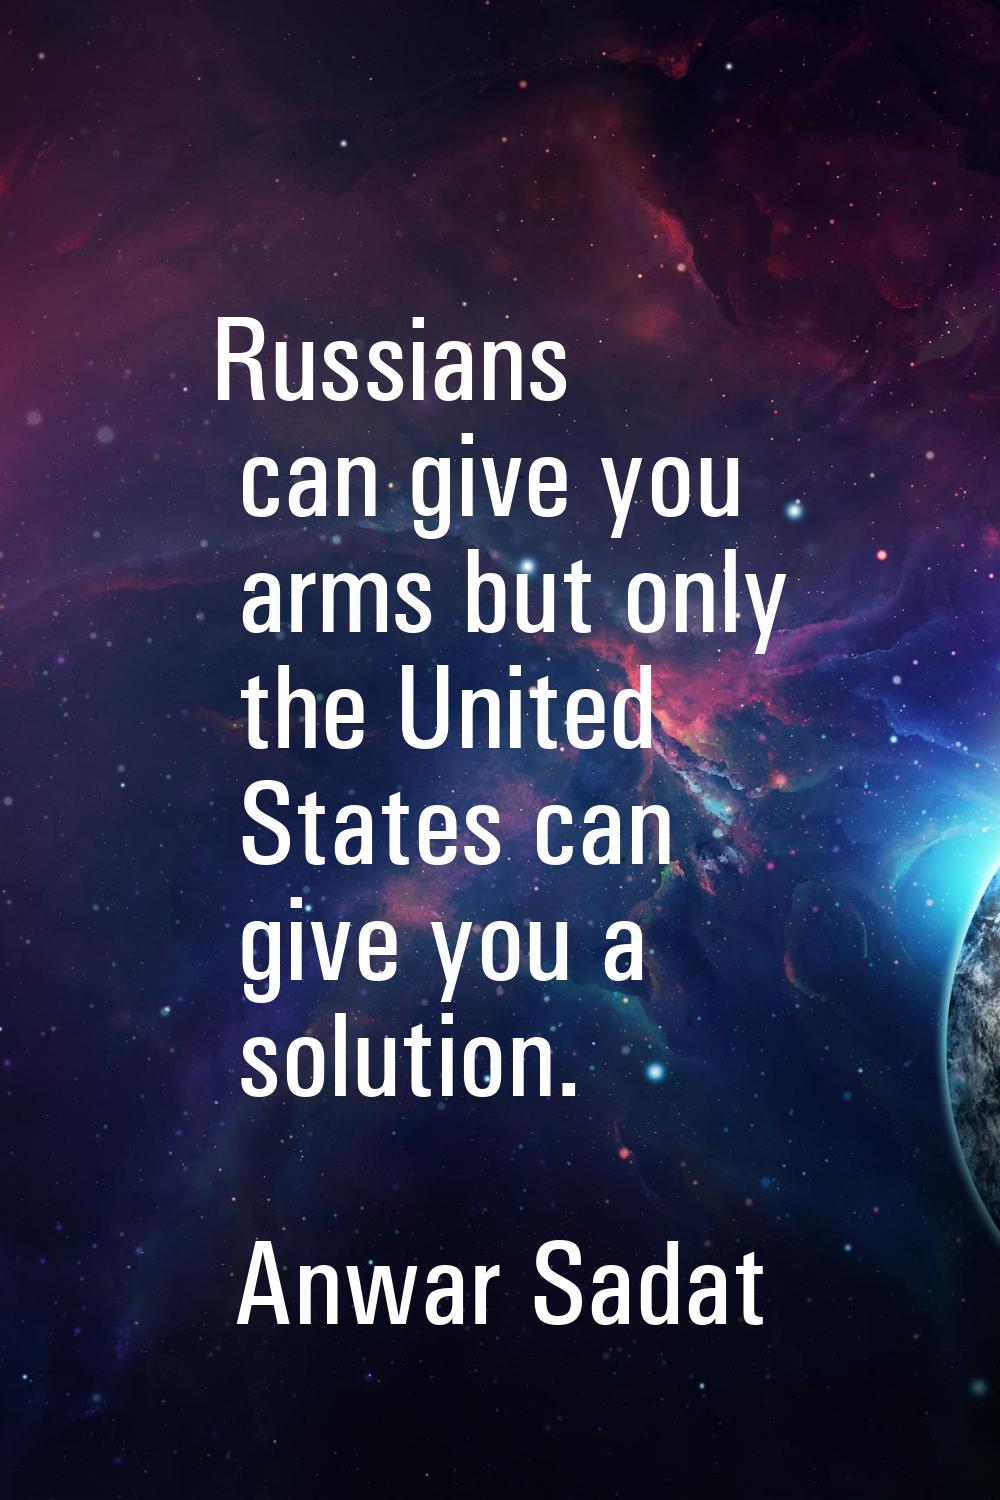 Russians can give you arms but only the United States can give you a solution.